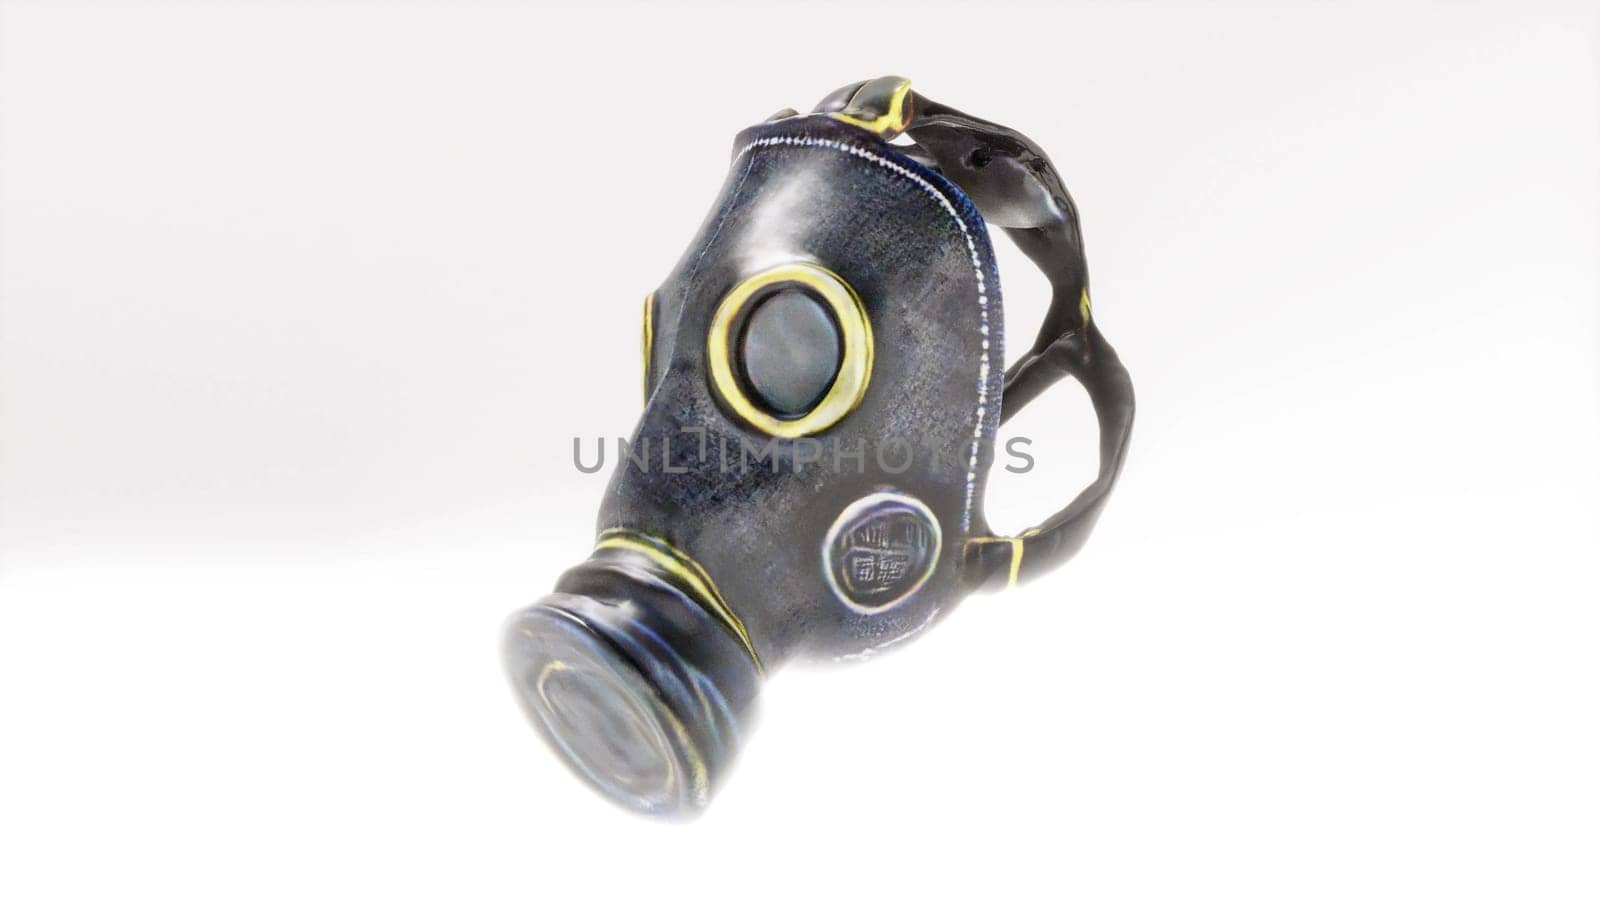 Military gas mask for protection on white bg 3d render by Zozulinskyi